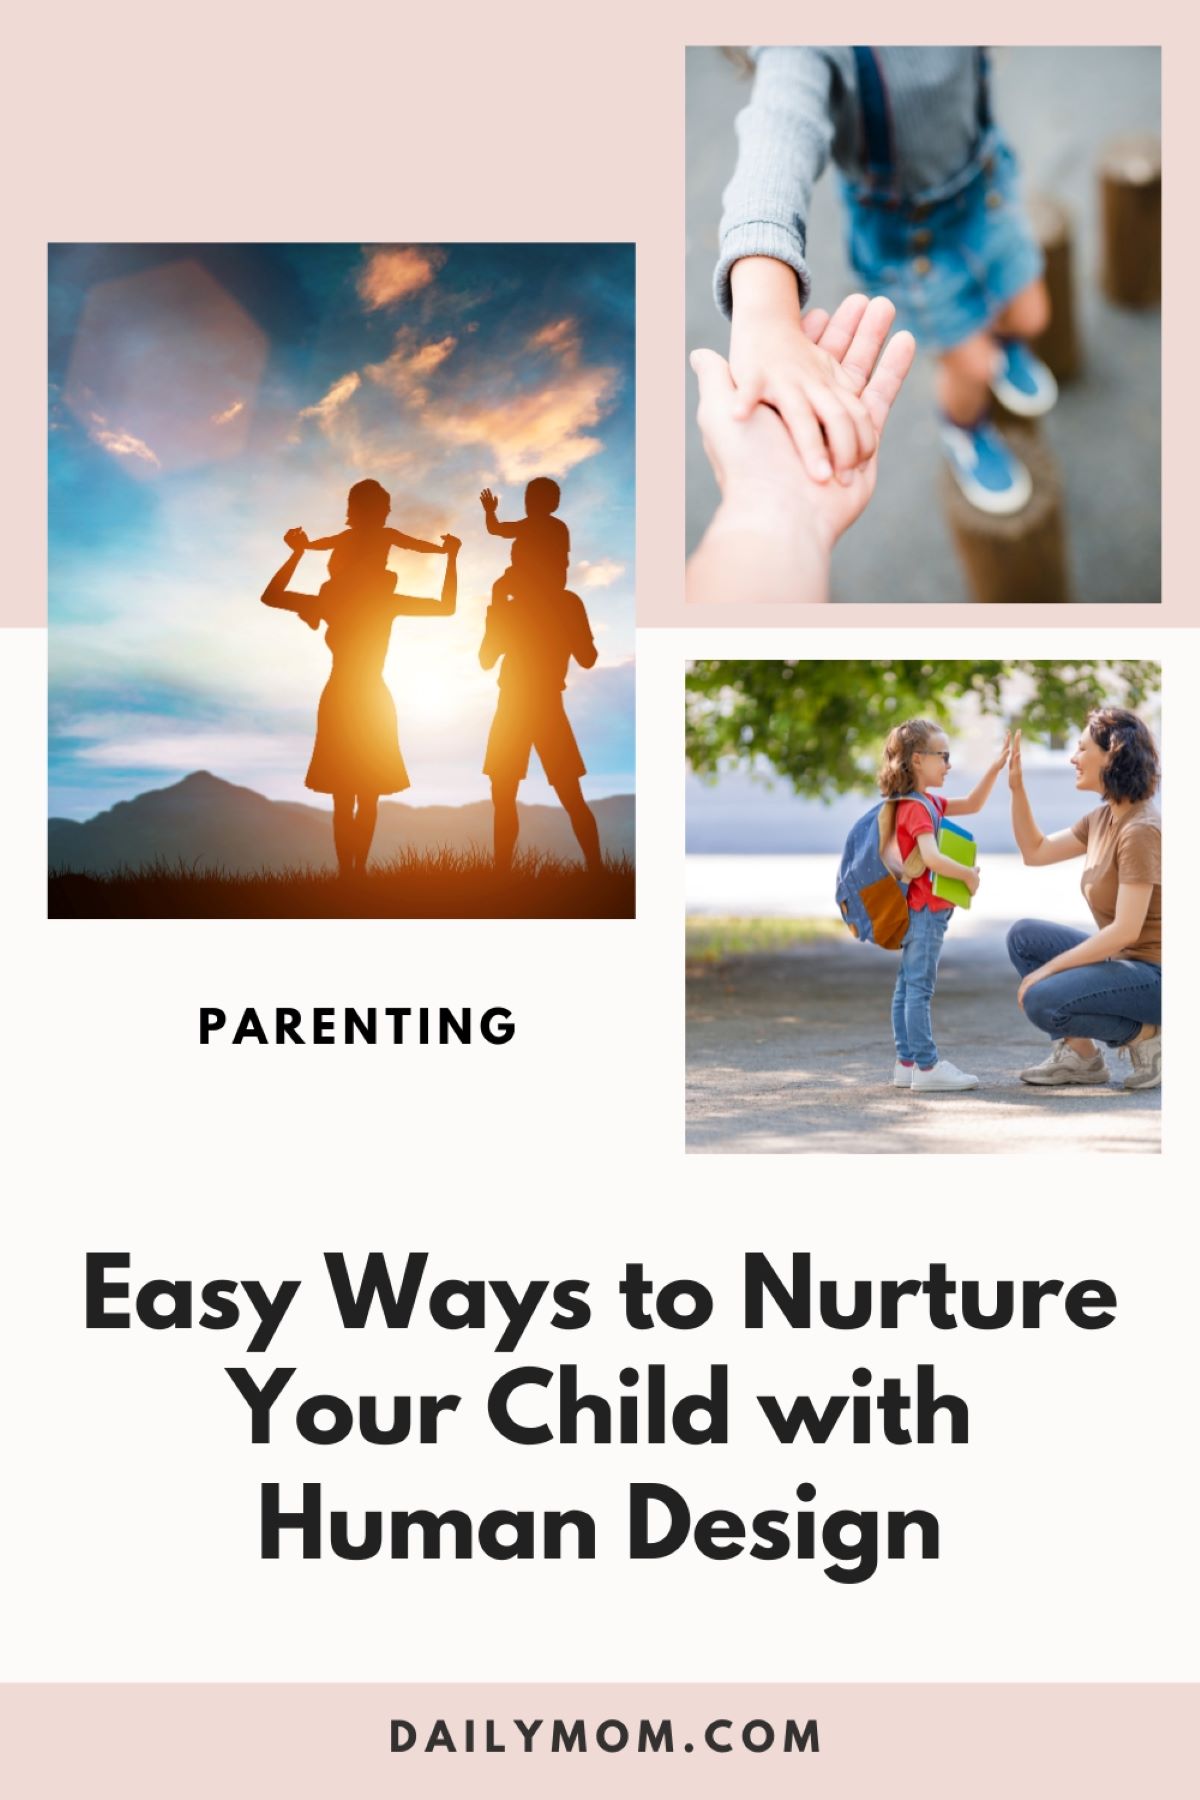 Human Design Parenting: 3 Astoundling Easy Ways To Nurture Your Child'S Unique Type Using Human Design 5 Daily Mom, Magazine For Families